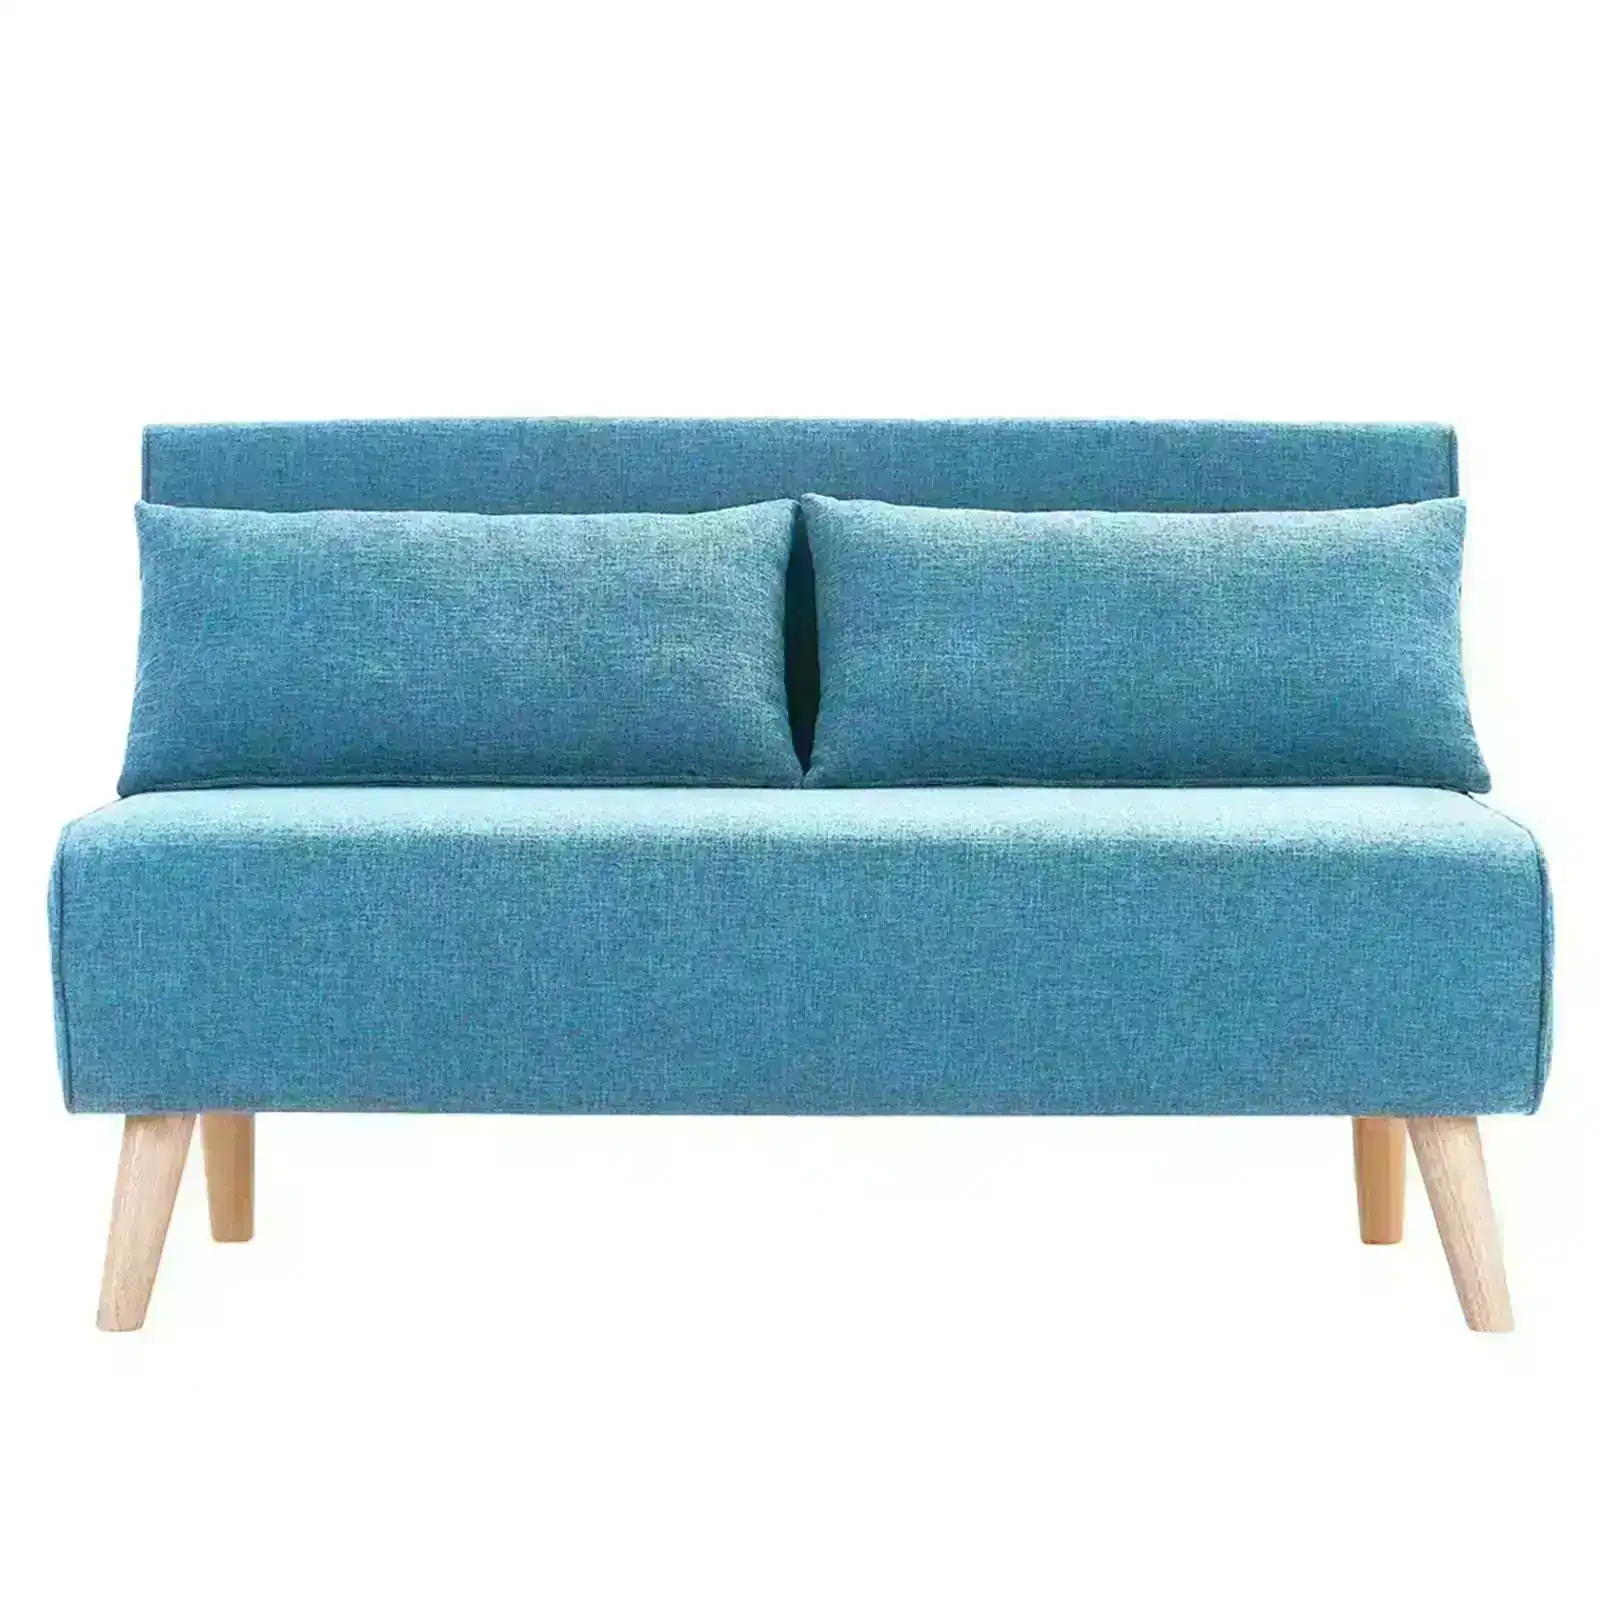 3 Seater Faux Velvet Sofa Bed Couch Furniture   Blue